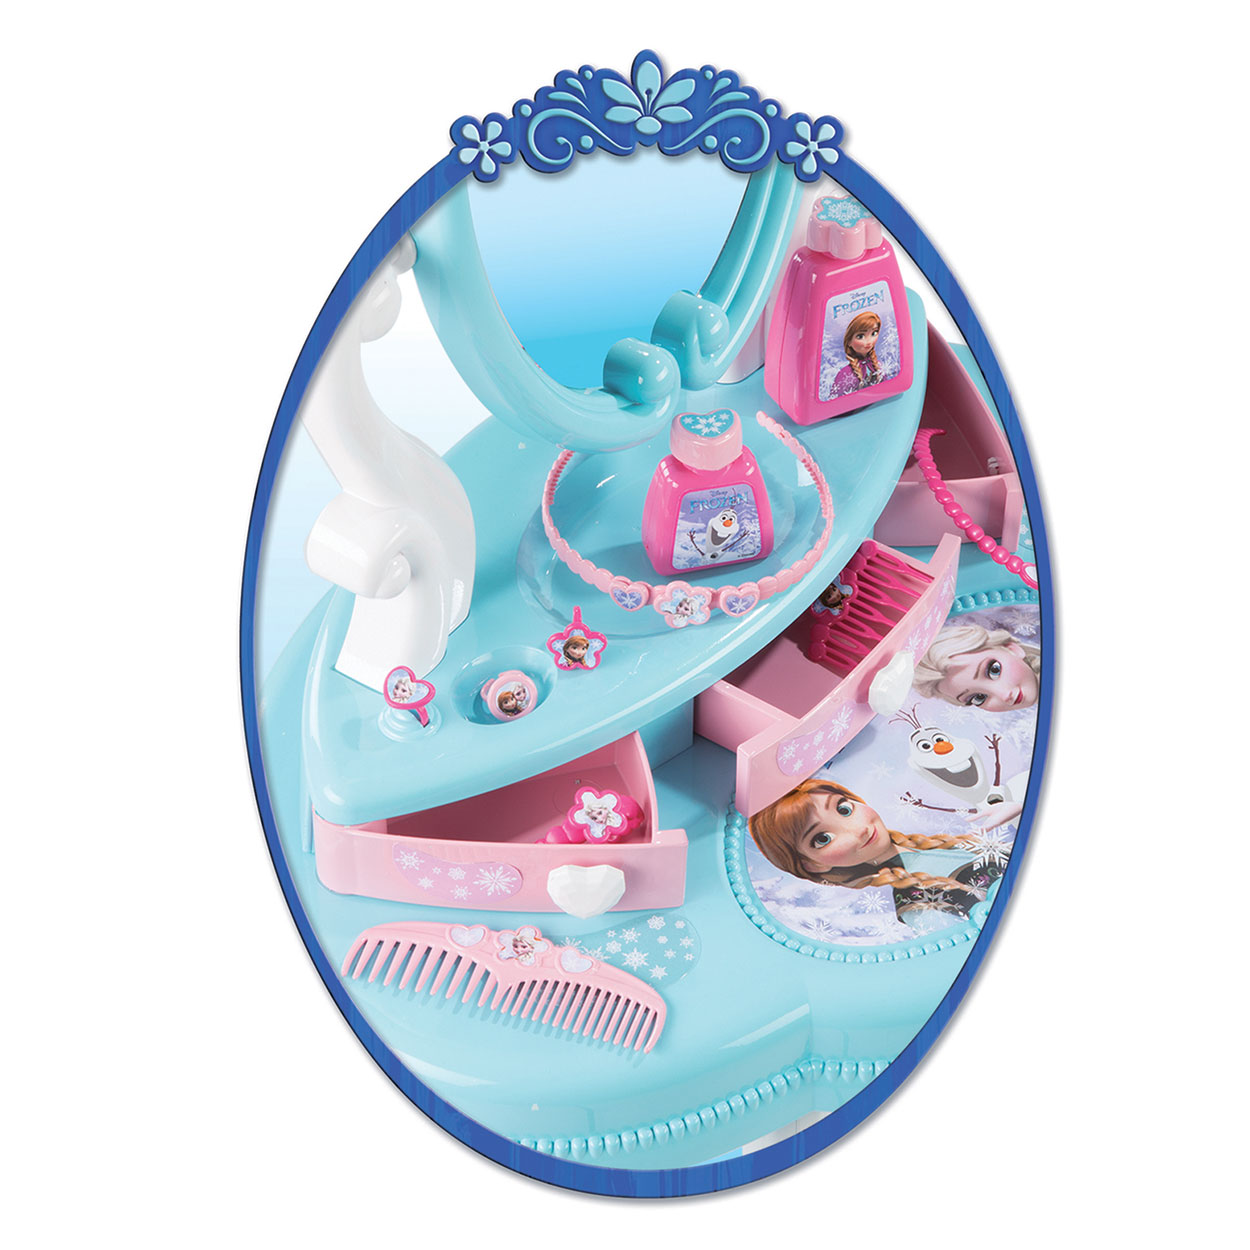 Smoby Hello Kitty 2in1 Dressing Table